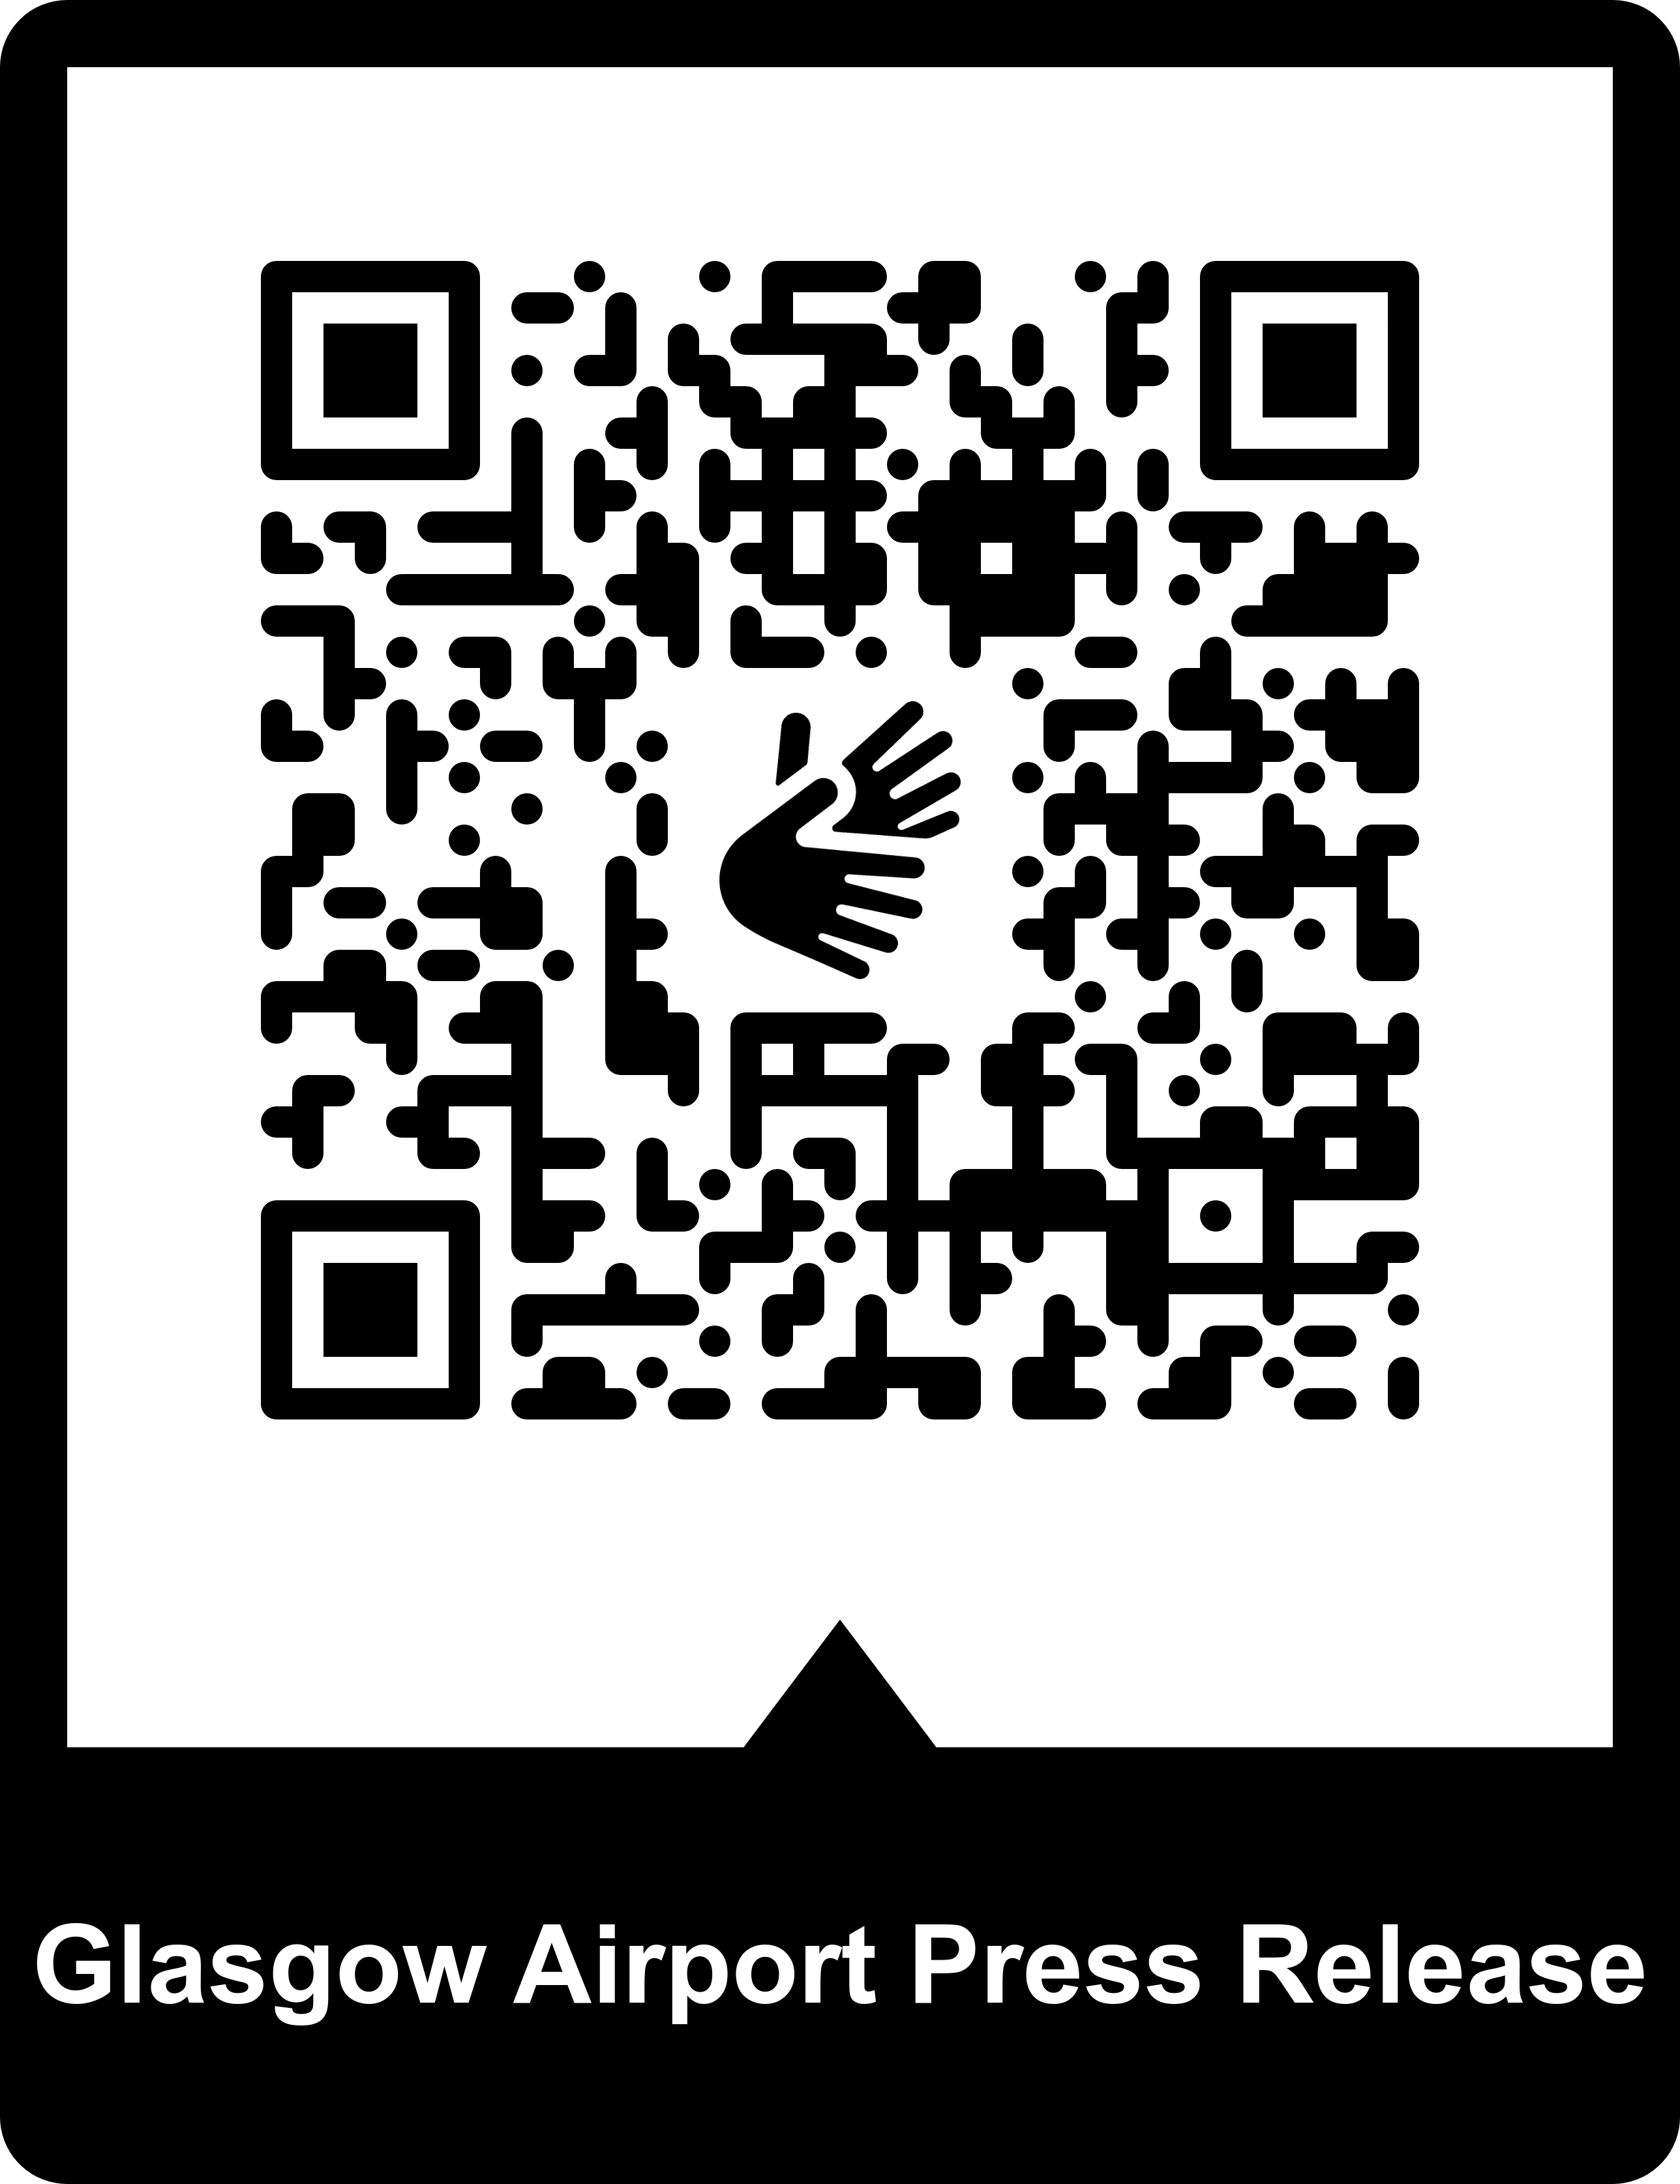 A qr code with a hand and a handDescription automatically generated